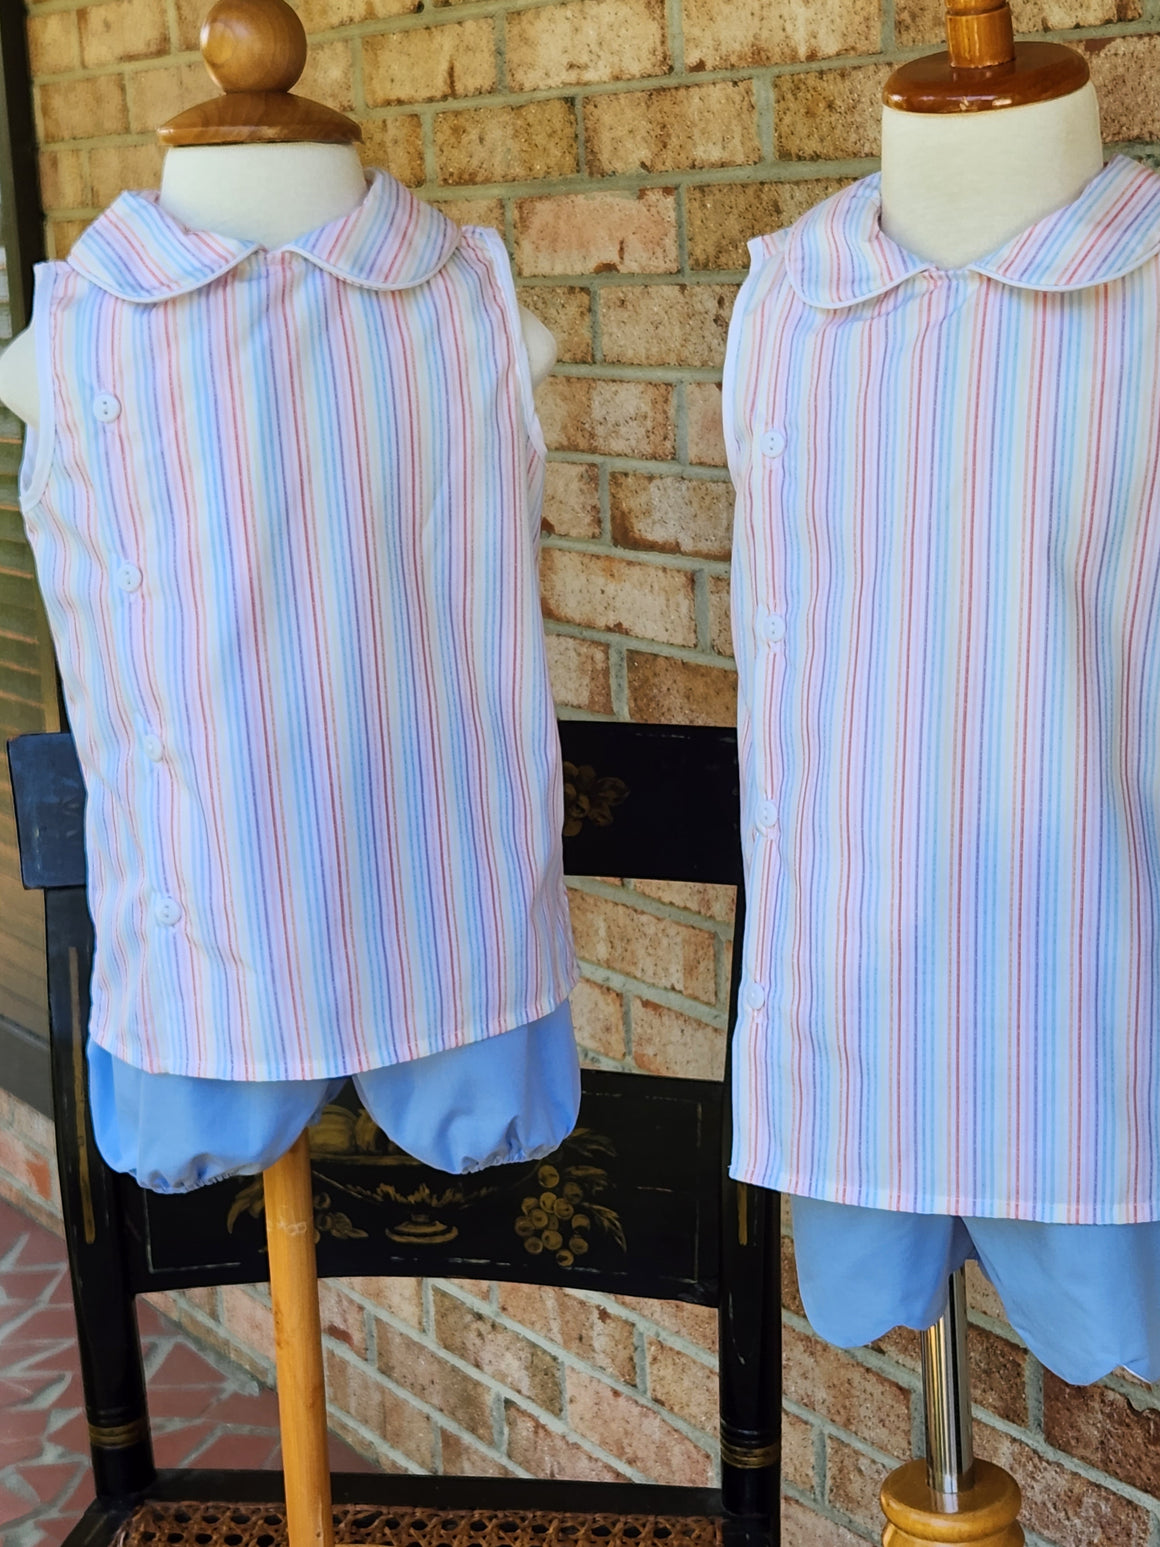 Unisex Summer Stripe Sleevless Top w/ Bloomer, Banded Shorts or Scallop Shorts